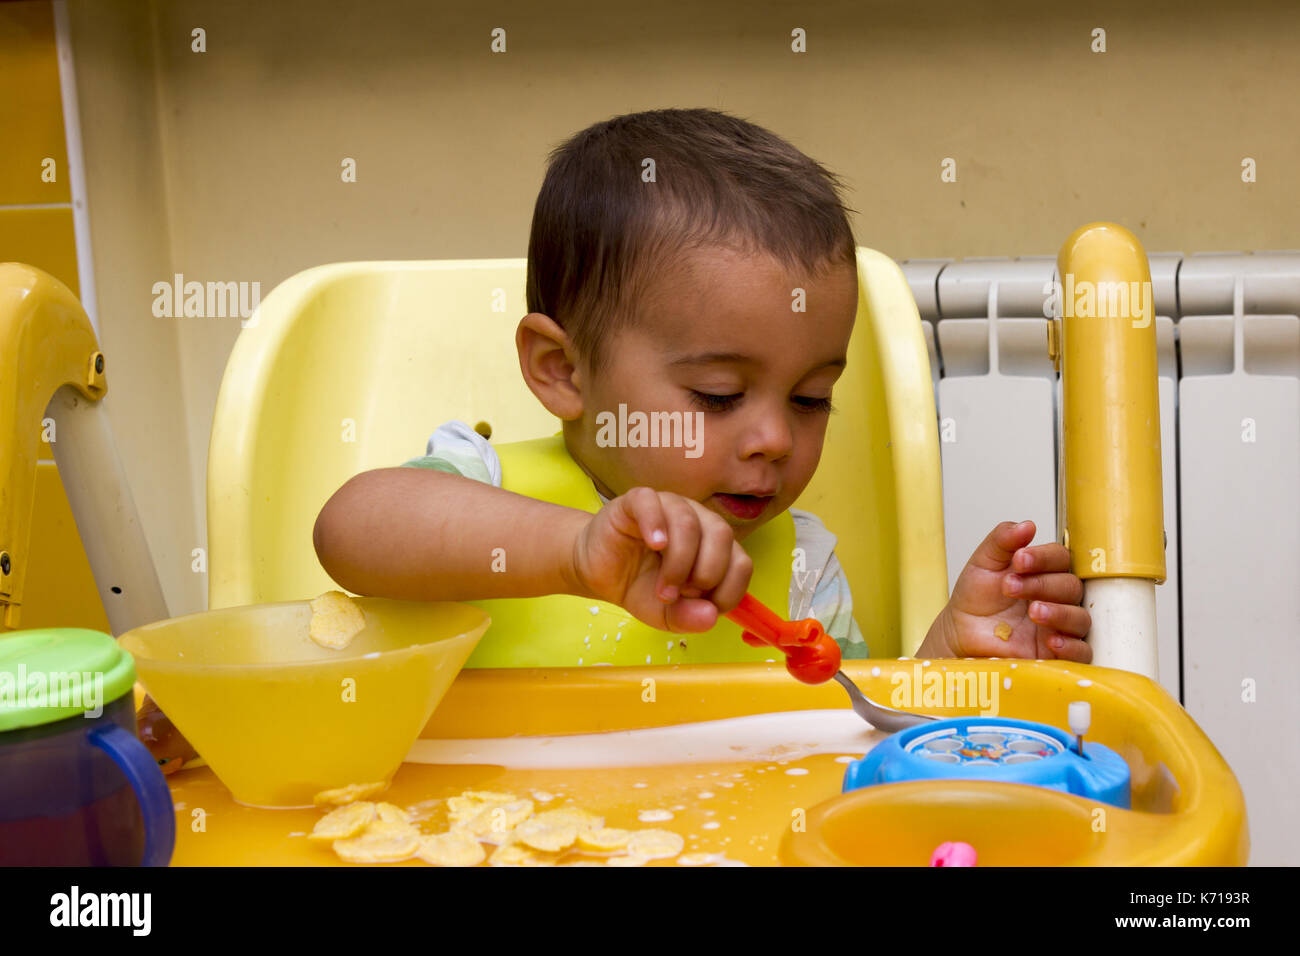 A little boy is sitting in a child's chair and eating Stock Photo